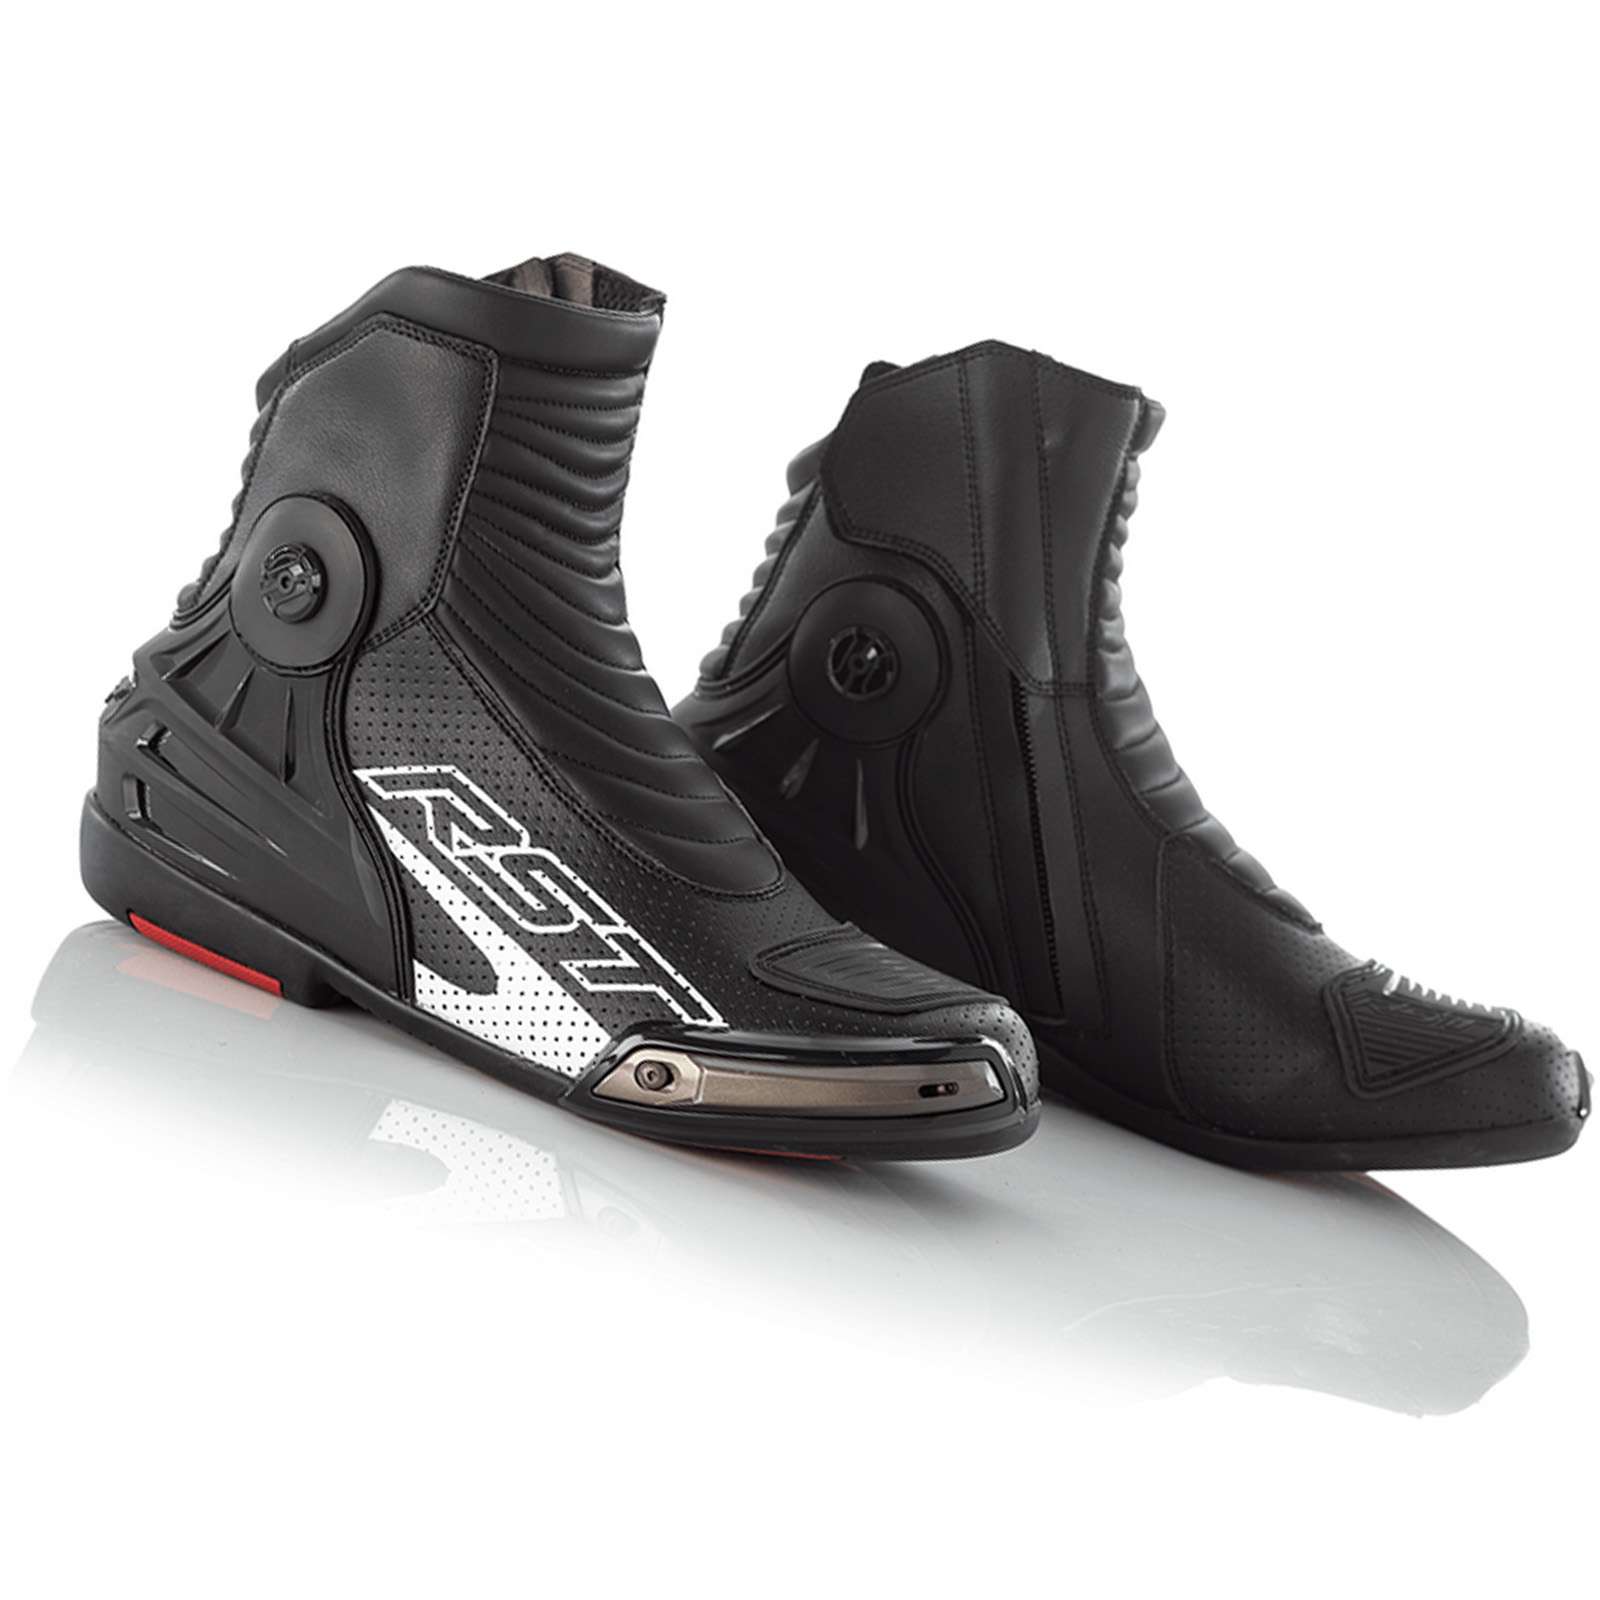 rst tractech evo 3 ce boots